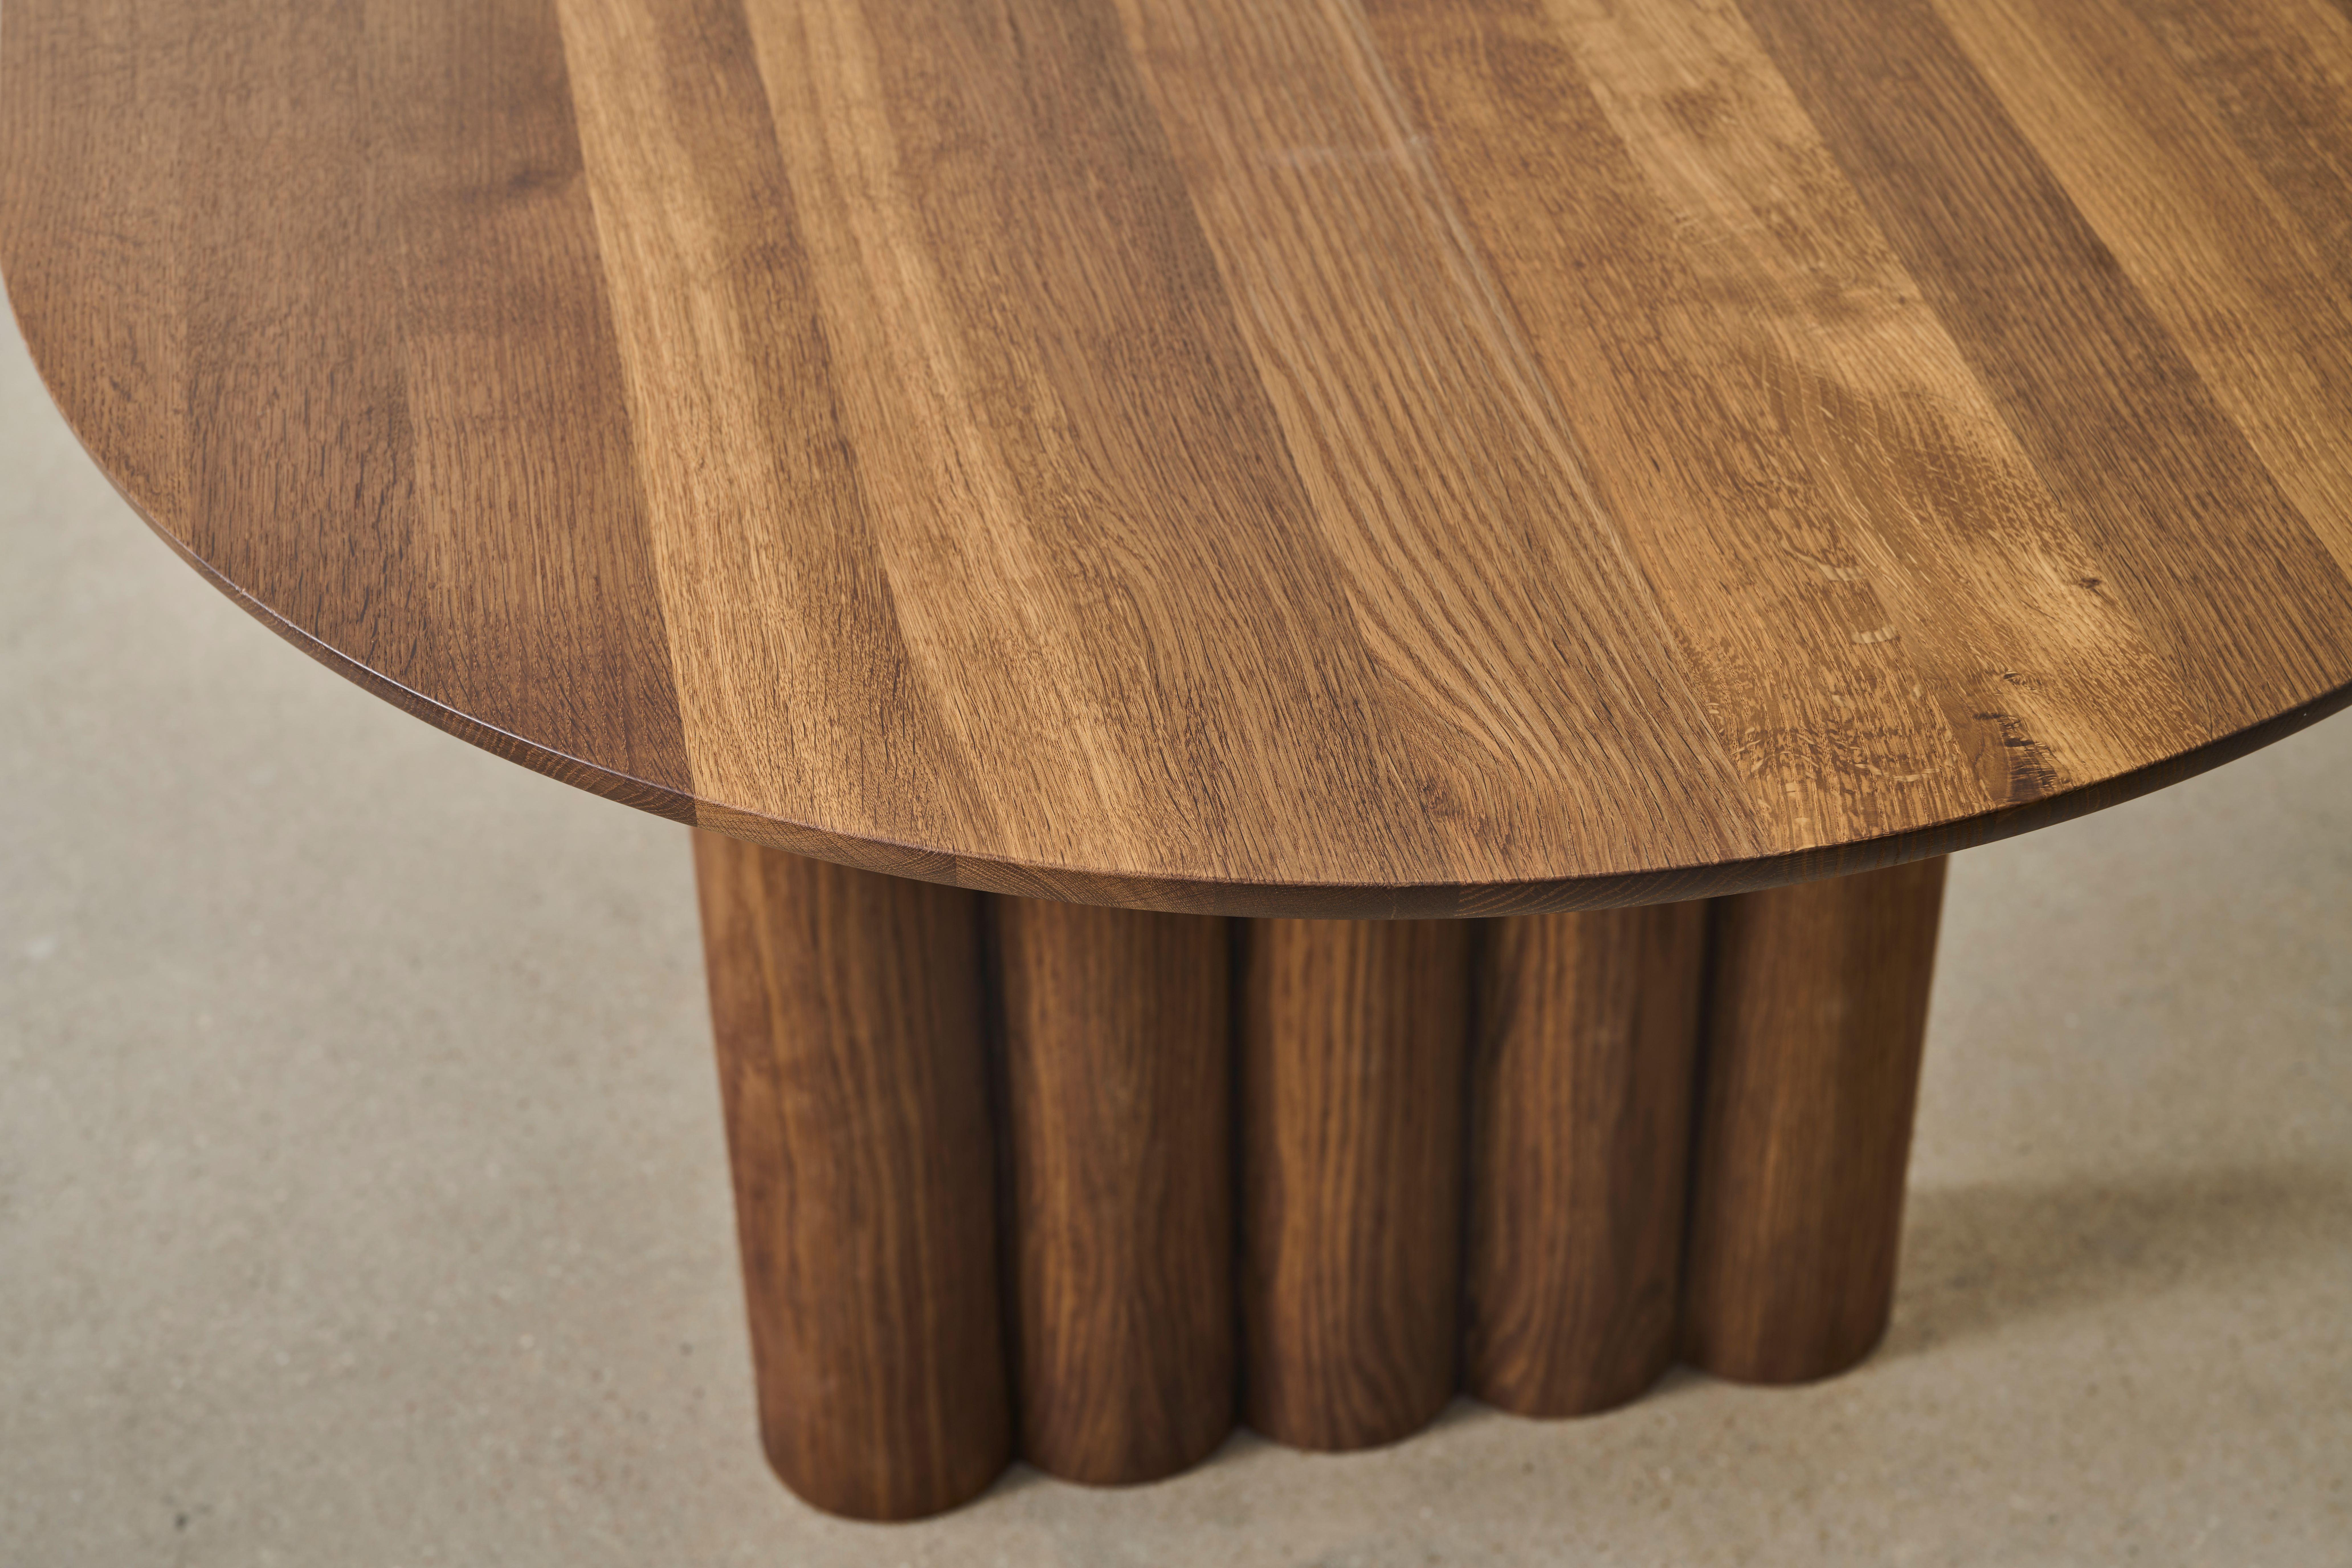 Scandinavian Modern Contemporary Dining Table 'Plush' by Dk3, Smoked Oak or Walnut, 370 For Sale